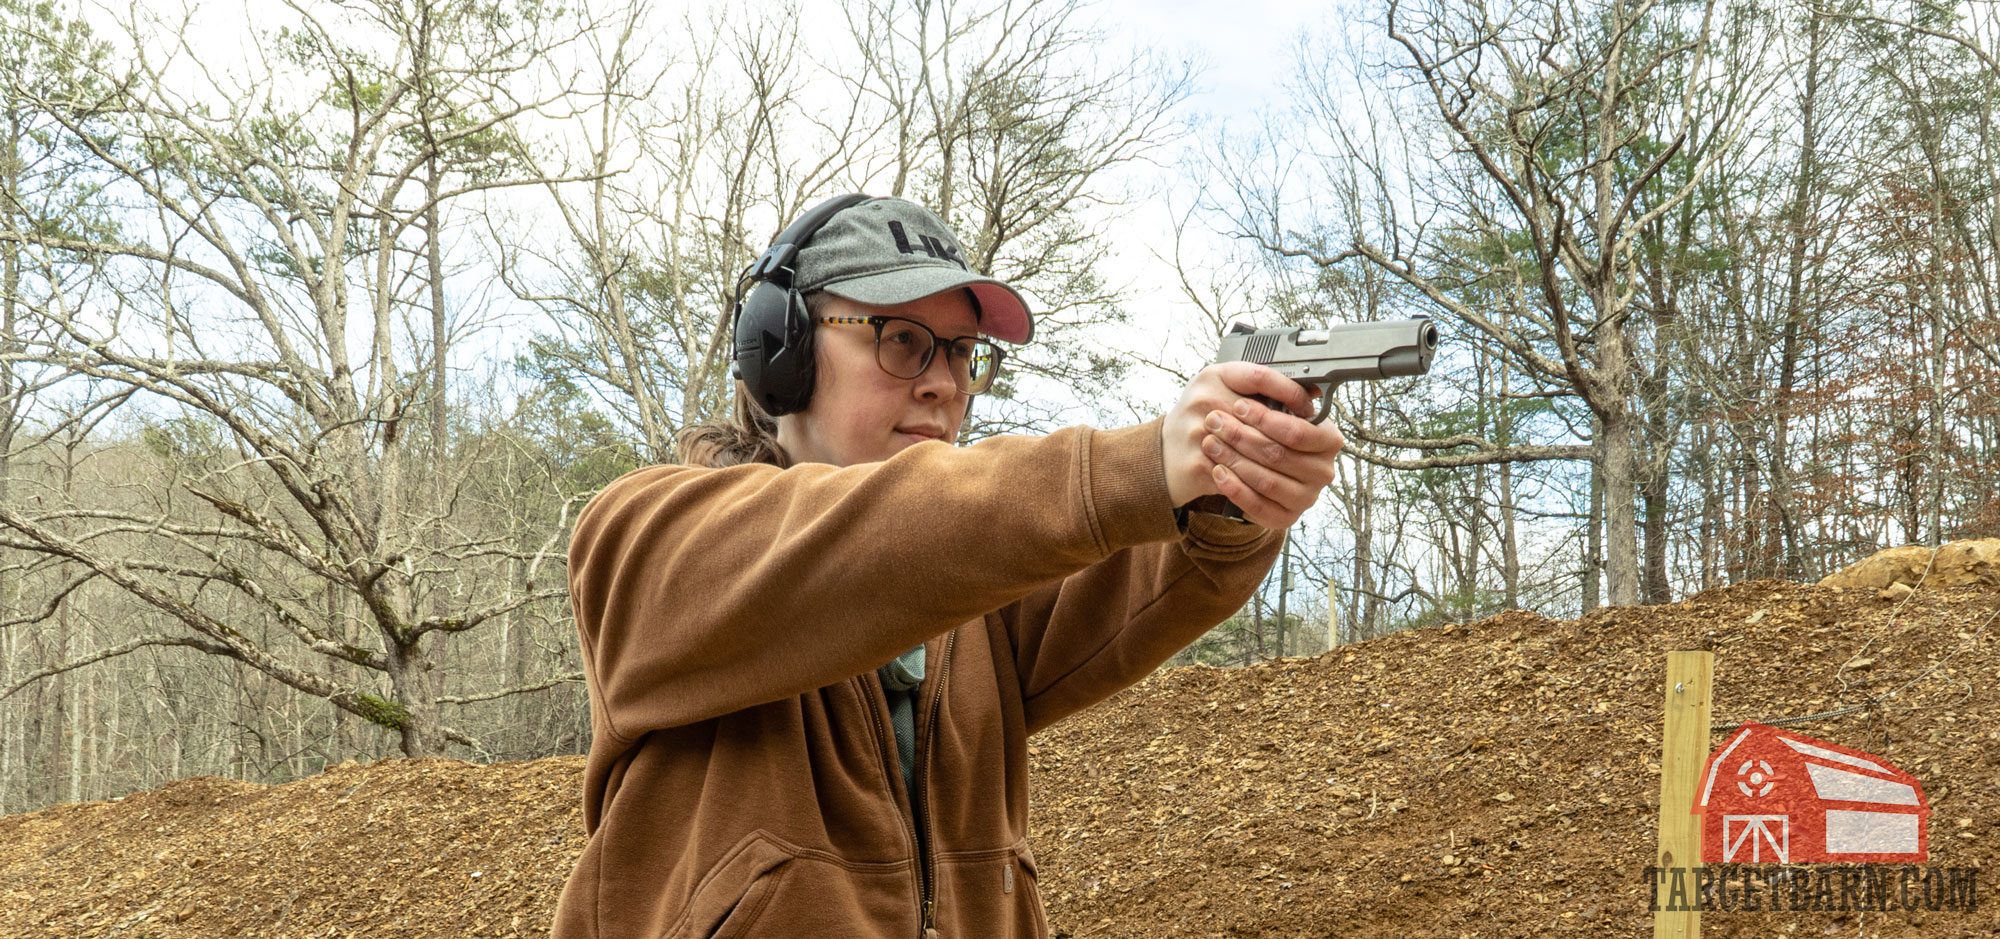 the author shooting a 1911 pistol